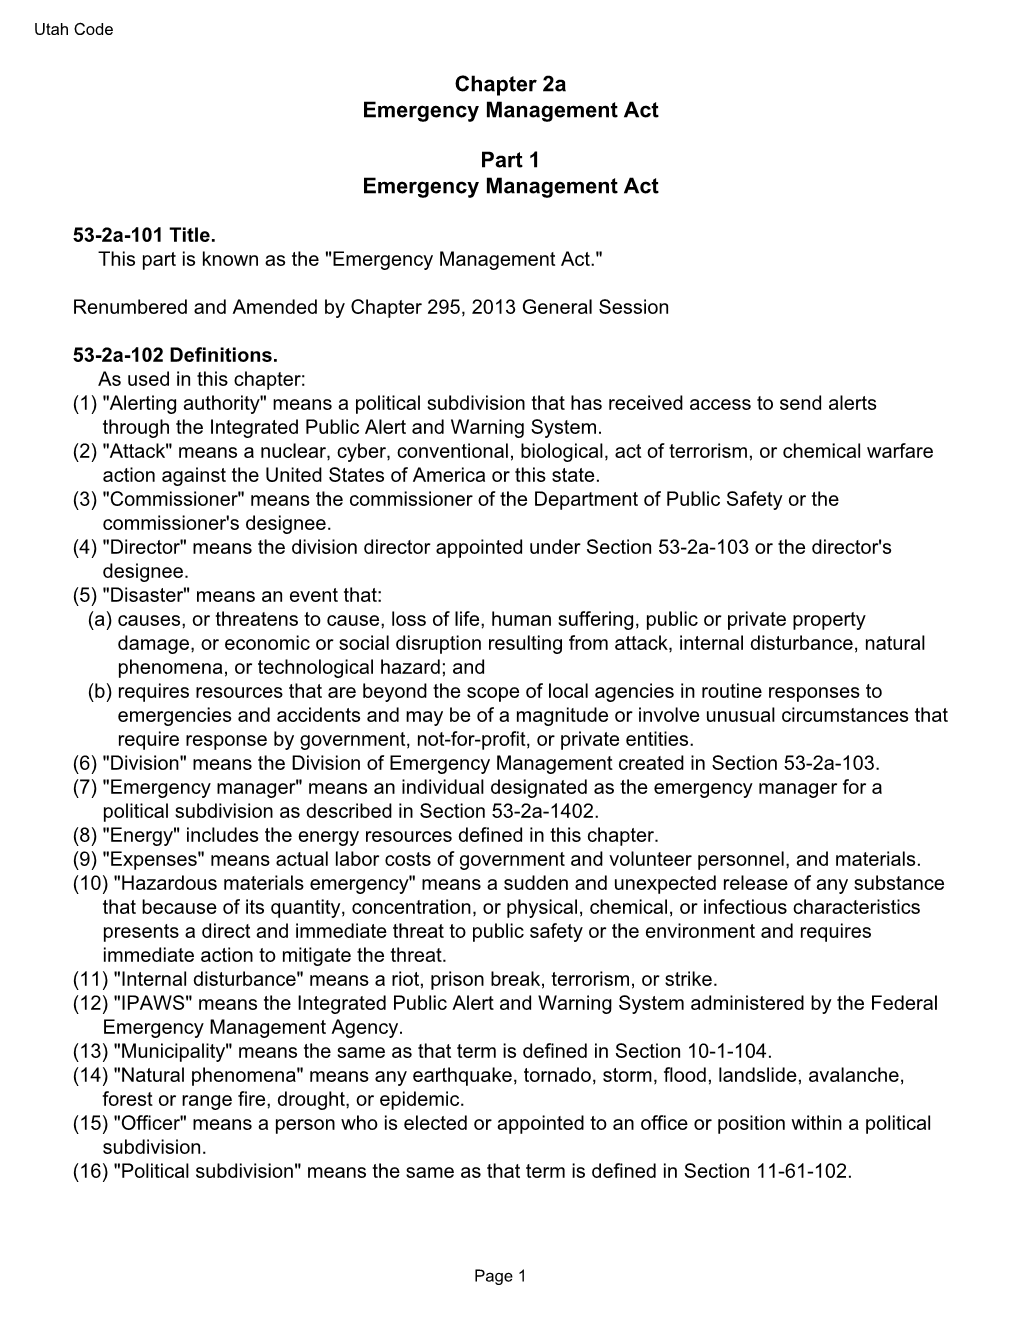 Chapter 2A Emergency Management Act Part 1 Emergency Management